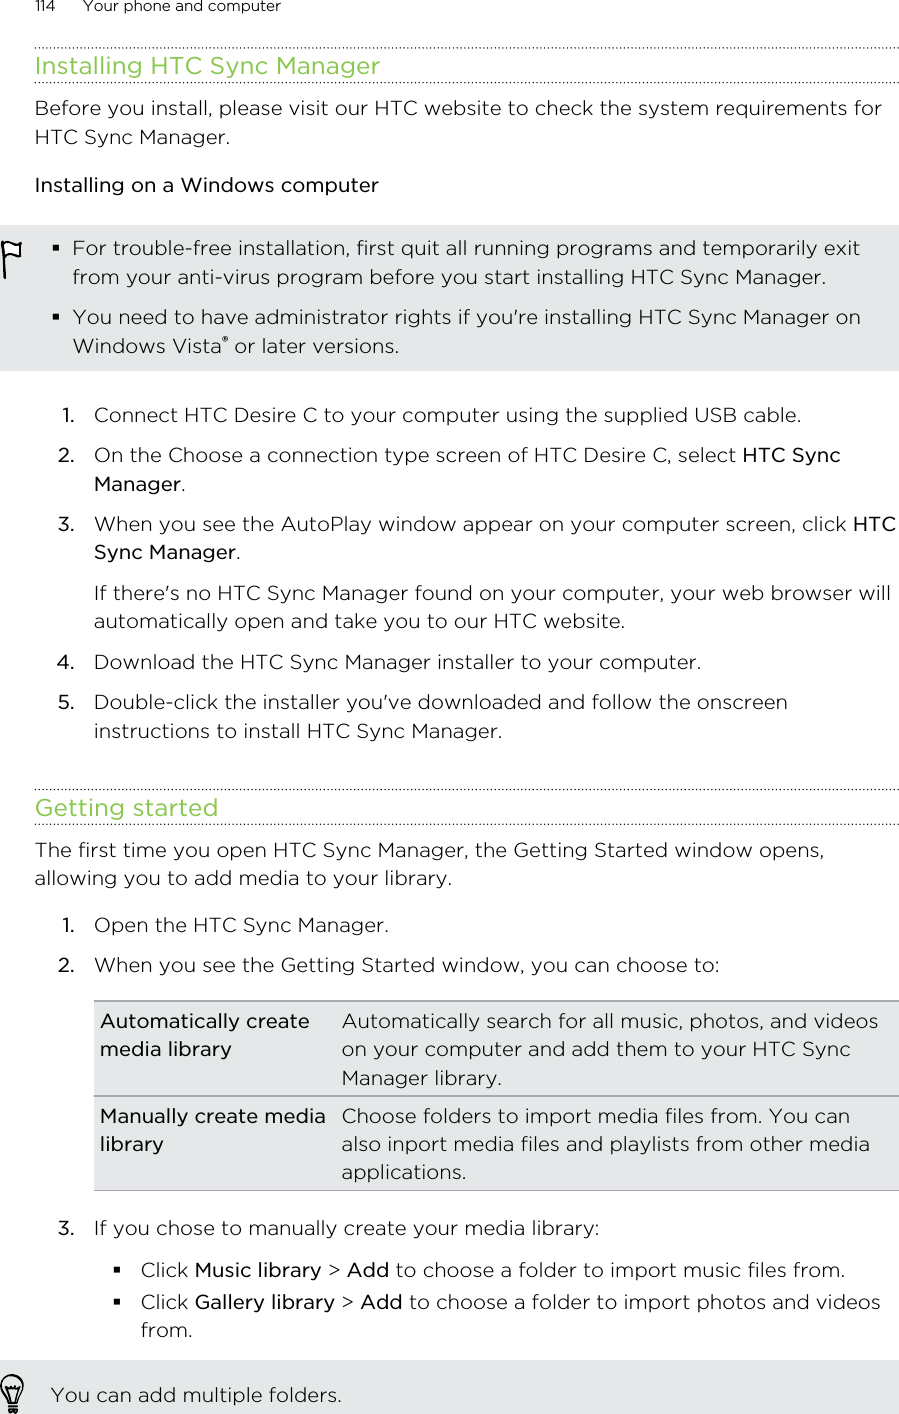 Installing HTC Sync ManagerBefore you install, please visit our HTC website to check the system requirements forHTC Sync Manager.Installing on a Windows computerFor trouble-free installation, first quit all running programs and temporarily exitfrom your anti-virus program before you start installing HTC Sync Manager.You need to have administrator rights if you&apos;re installing HTC Sync Manager onWindows Vista® or later versions.1. Connect HTC Desire C to your computer using the supplied USB cable.2. On the Choose a connection type screen of HTC Desire C, select HTC SyncManager.3. When you see the AutoPlay window appear on your computer screen, click HTCSync Manager. If there&apos;s no HTC Sync Manager found on your computer, your web browser willautomatically open and take you to our HTC website.4. Download the HTC Sync Manager installer to your computer.5. Double-click the installer you&apos;ve downloaded and follow the onscreeninstructions to install HTC Sync Manager.Getting startedThe first time you open HTC Sync Manager, the Getting Started window opens,allowing you to add media to your library.1. Open the HTC Sync Manager.2. When you see the Getting Started window, you can choose to:Automatically createmedia libraryAutomatically search for all music, photos, and videoson your computer and add them to your HTC SyncManager library.Manually create medialibraryChoose folders to import media files from. You canalso inport media files and playlists from other mediaapplications.3. If you chose to manually create your media library:Click Music library &gt; Add to choose a folder to import music files from.Click Gallery library &gt; Add to choose a folder to import photos and videosfrom.You can add multiple folders.114 Your phone and computer